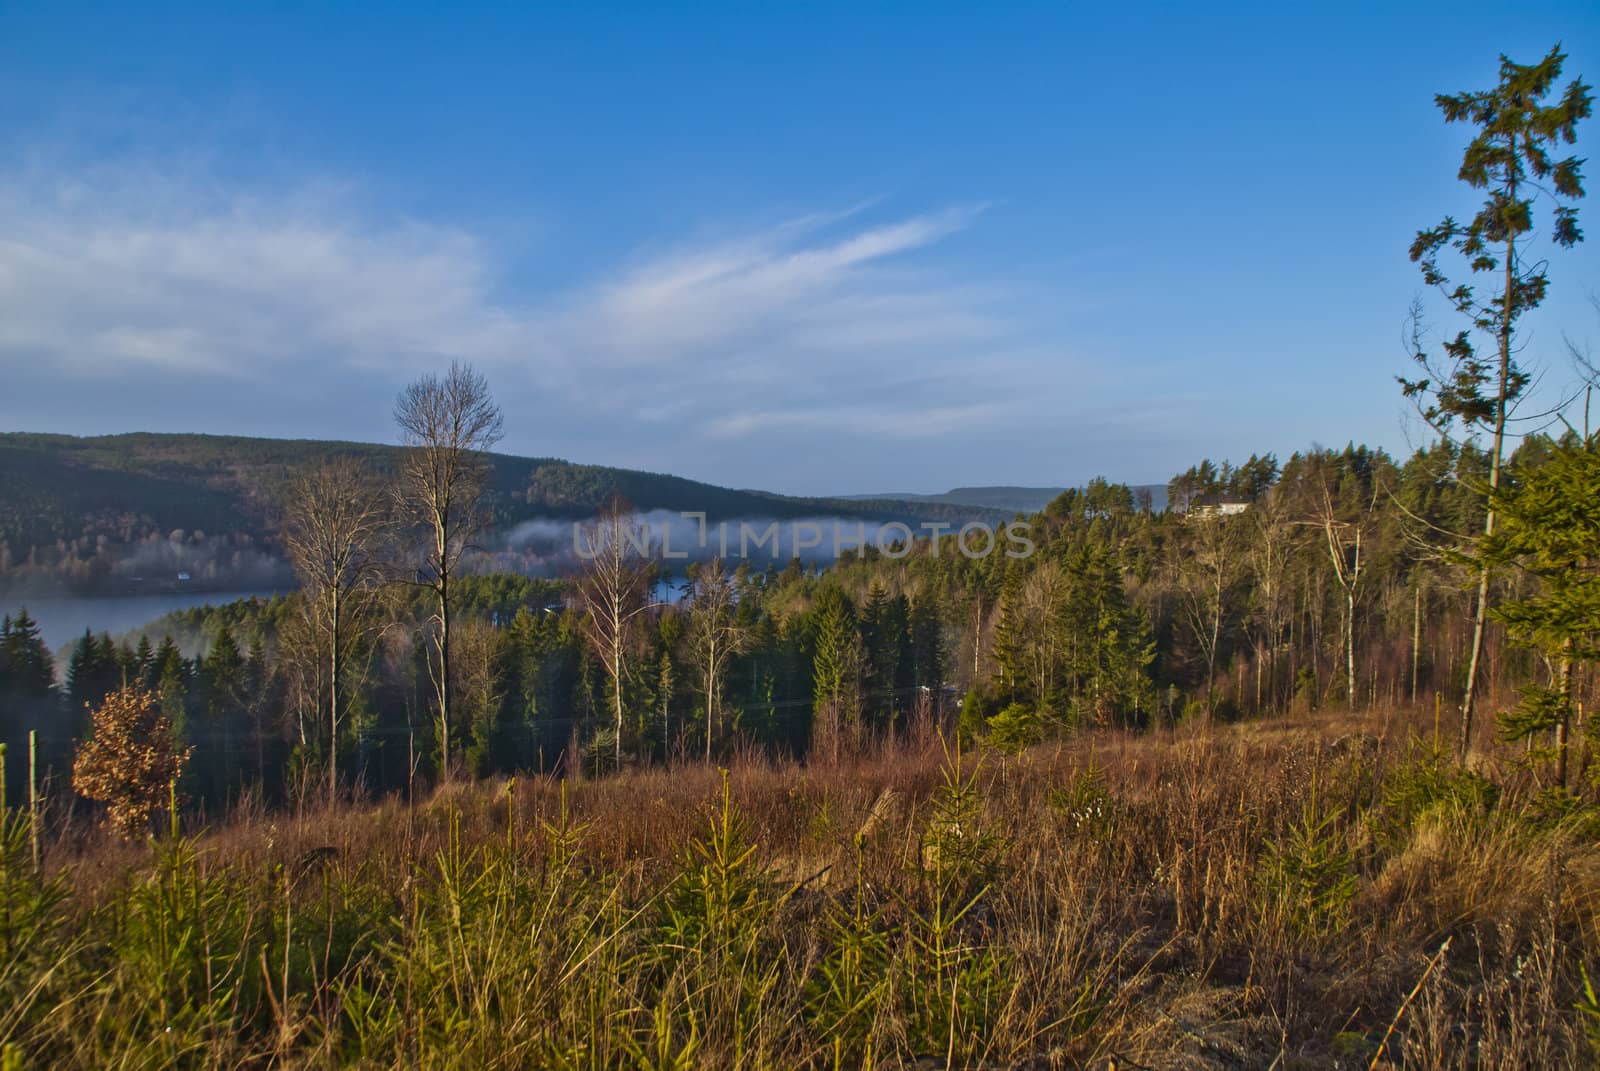 picture is shot in november 2012 at "Bakke" which is a rural village in halden municipality